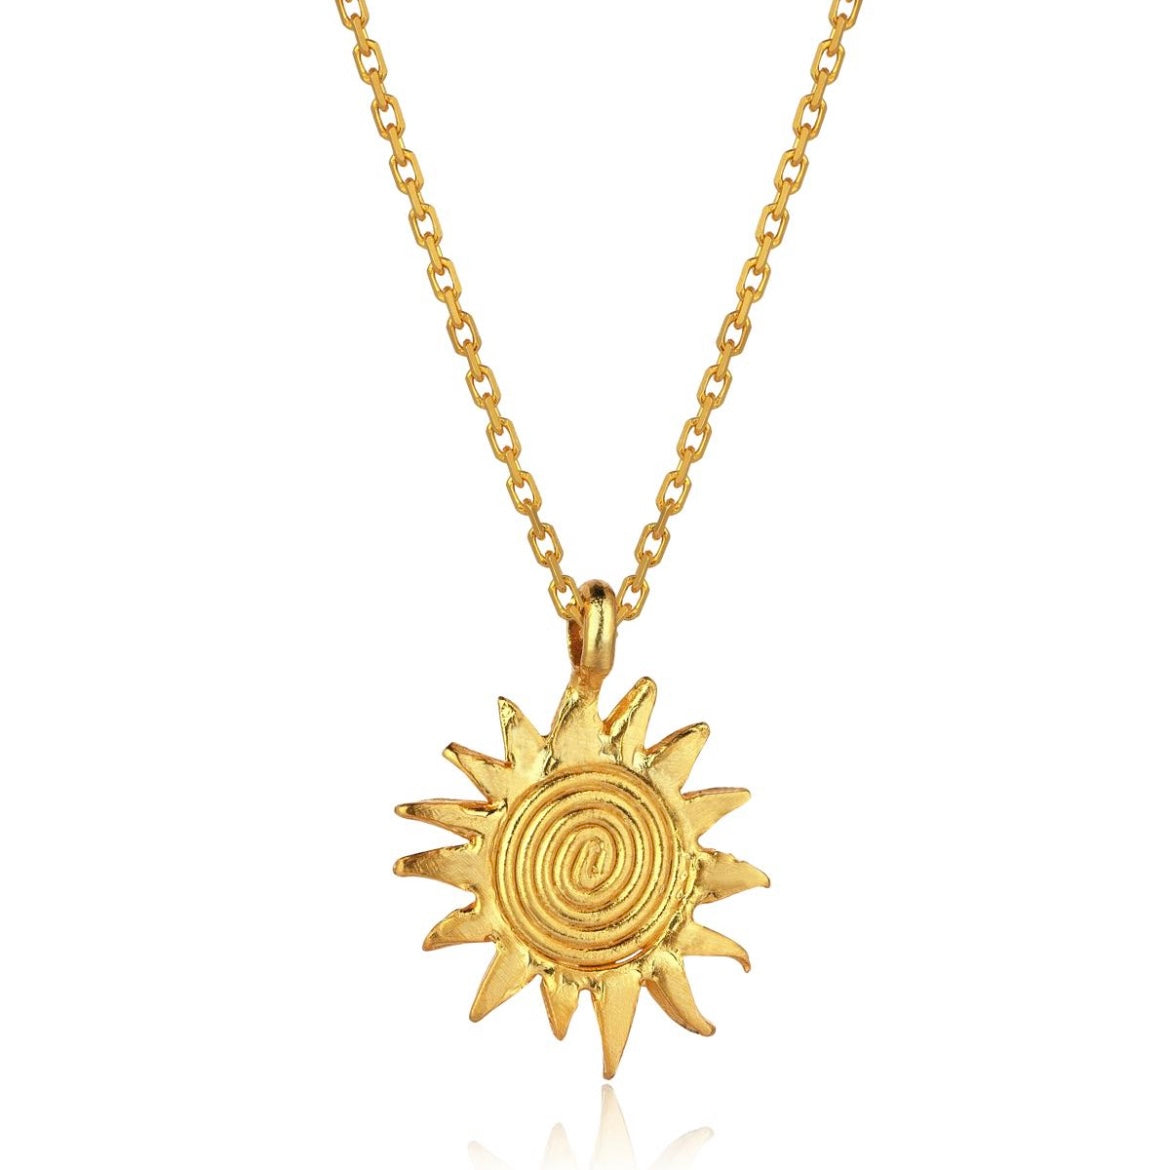 The Spiral Sun Necklace